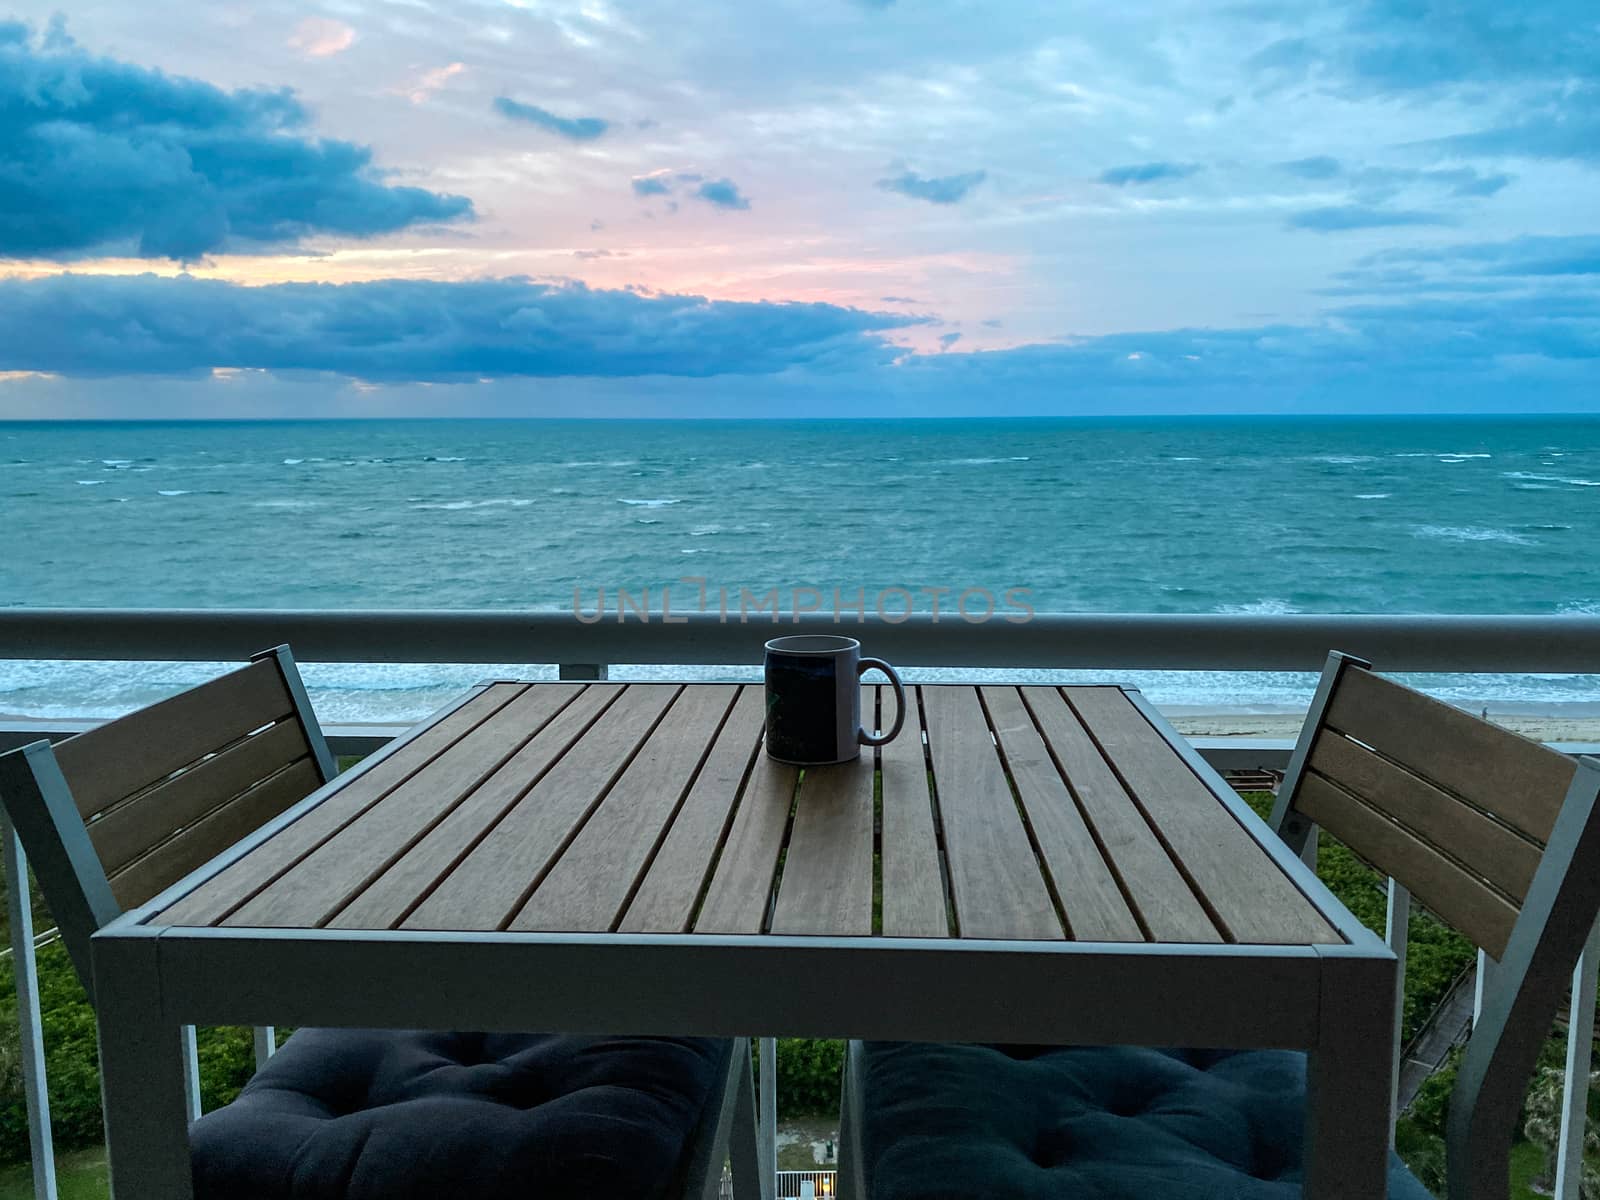 A coffee cup on a table with a vibrant sunrise over the Atlantic Ocean on North Hutchinson Island in Florida in the background.